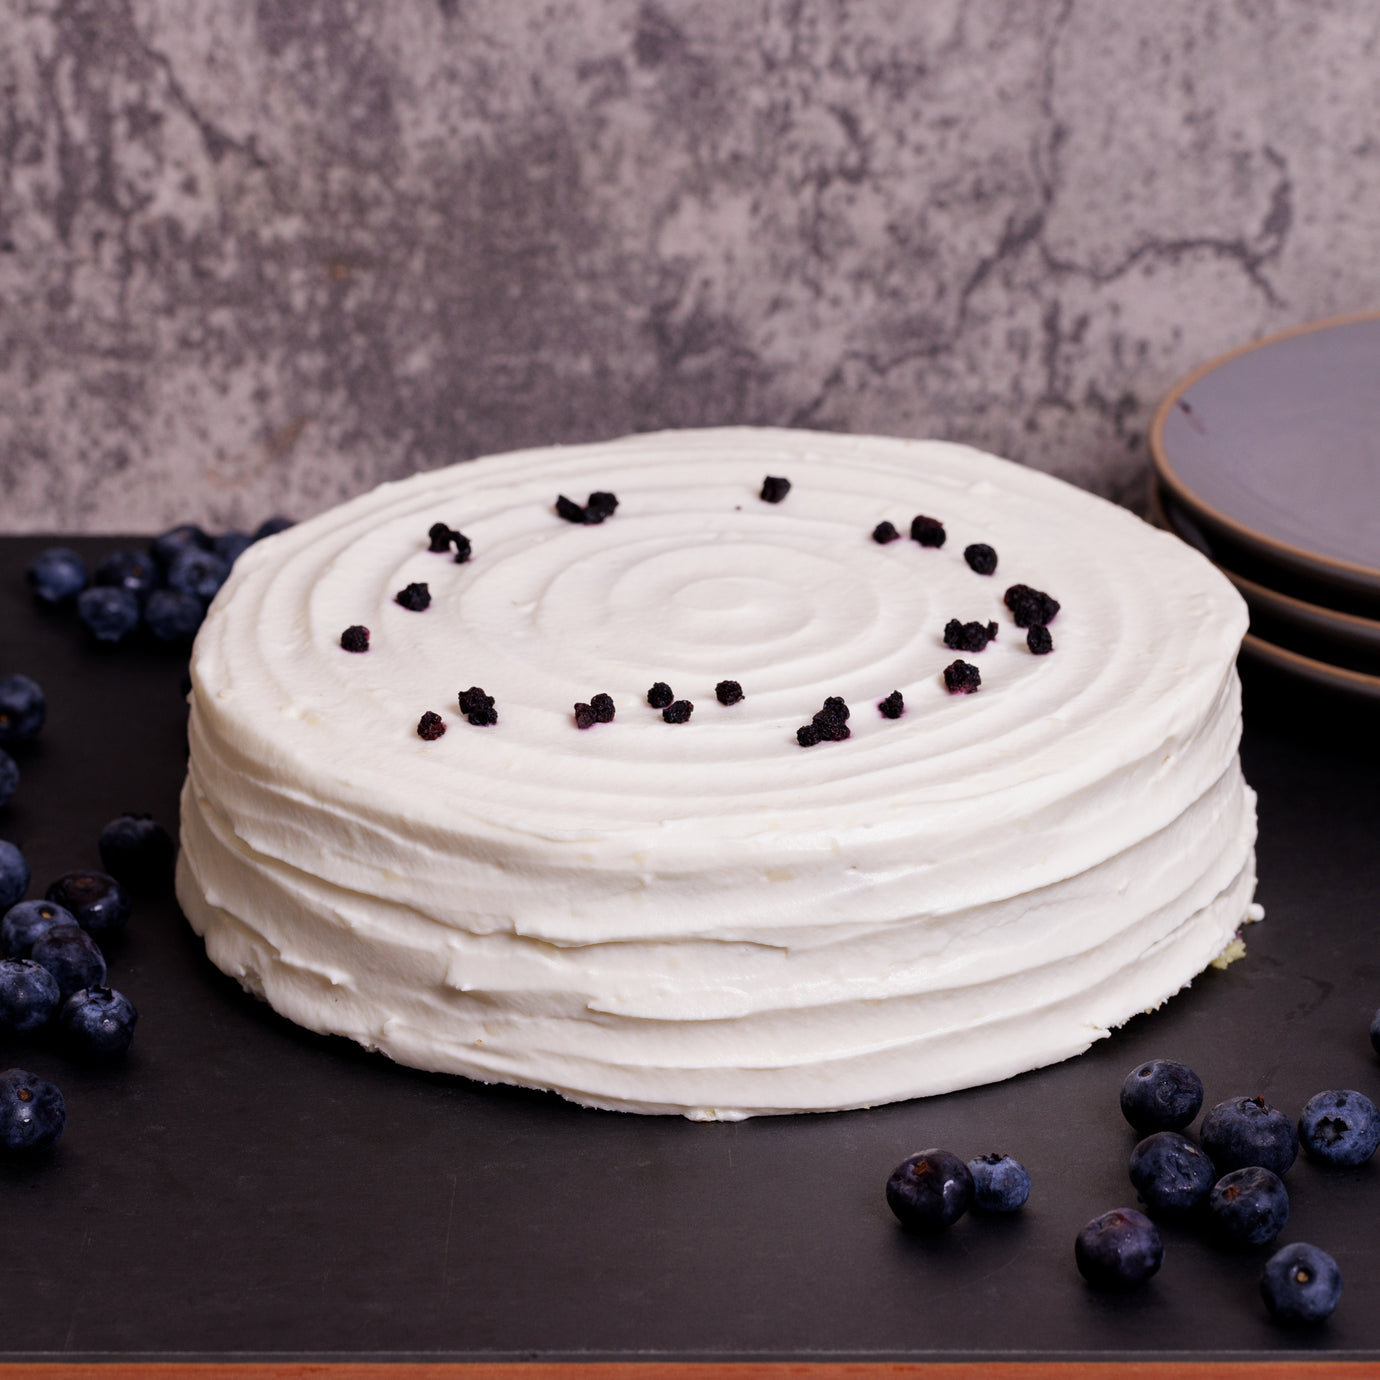 Cakes & Pies -- All Cakes are 3 Layer and 8 " -- Feed 12-16 Comfortably